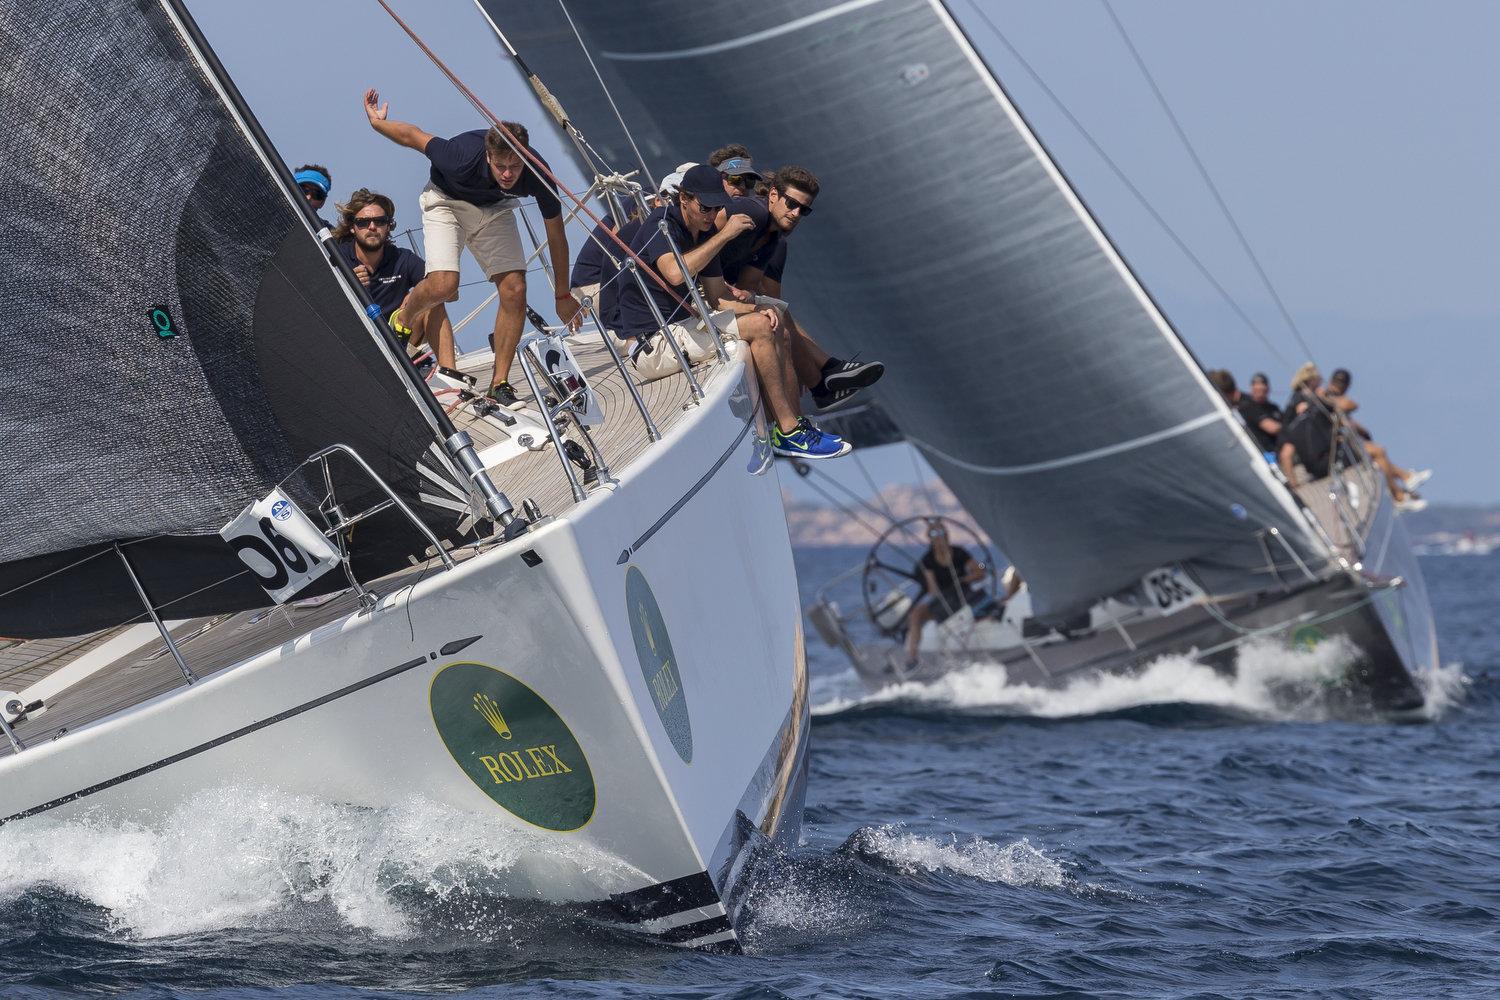 The 2018 Rolex Swan Cup